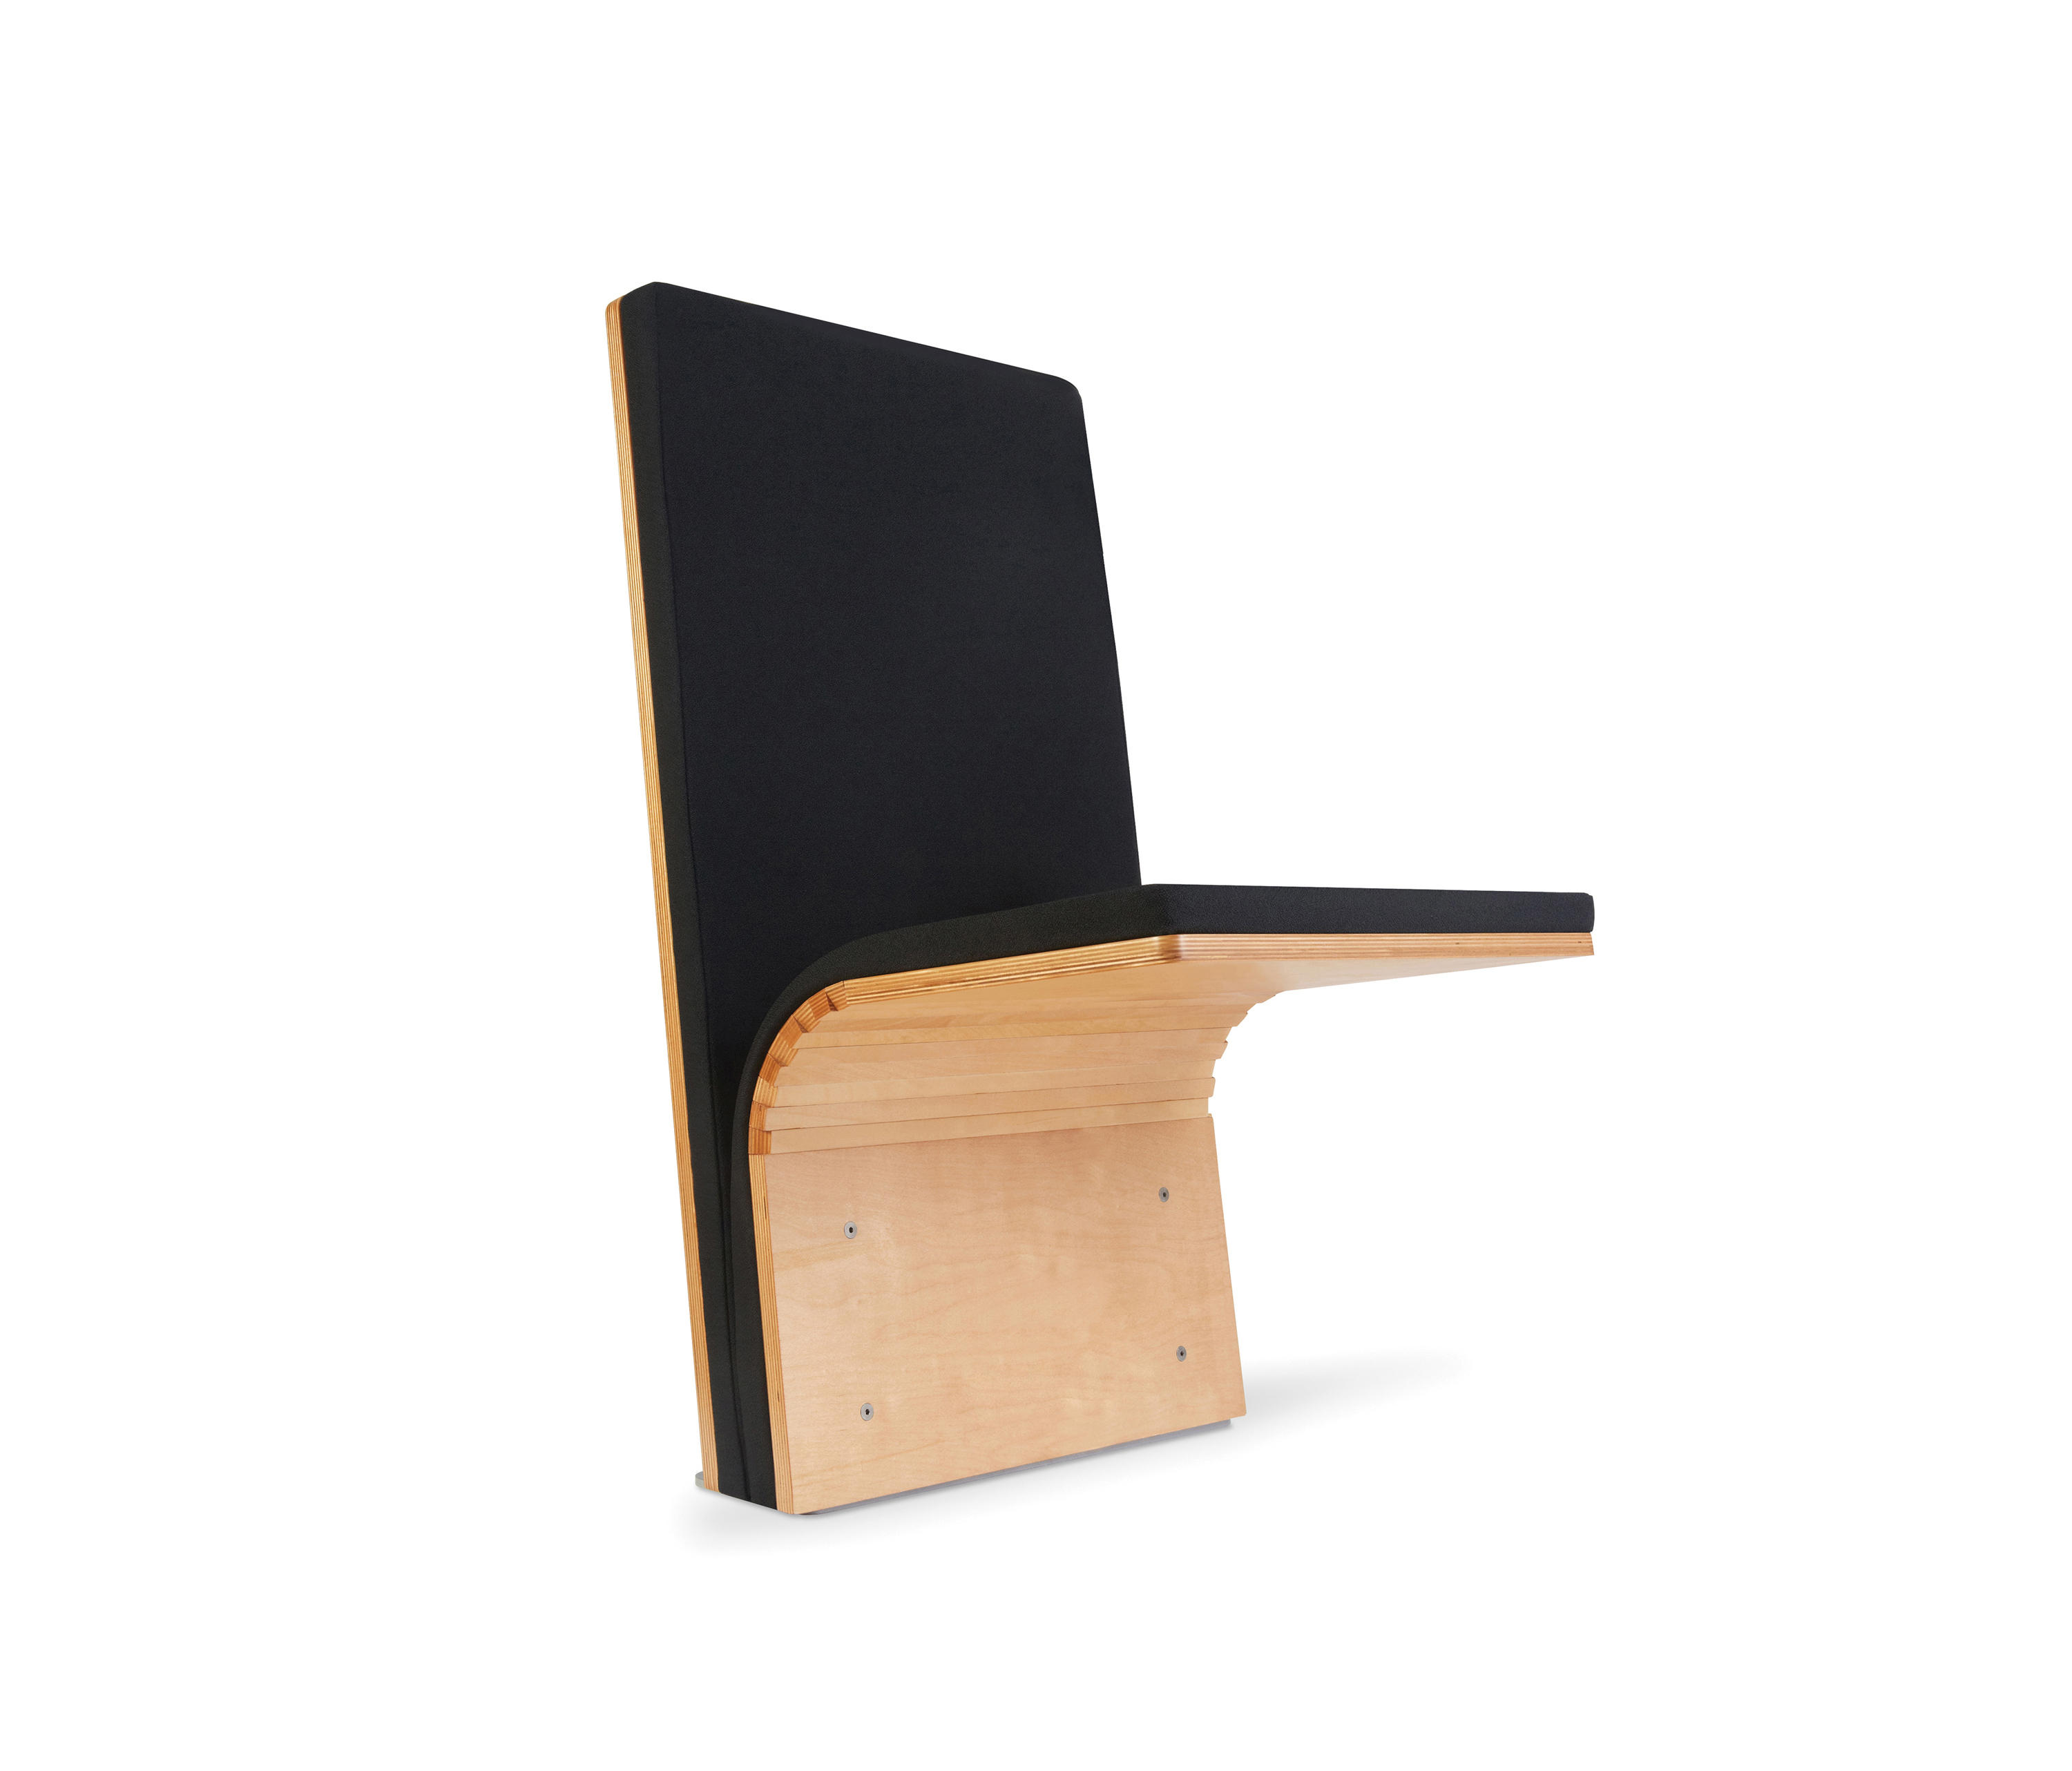 There's a New Chair in Town: JumpSeat by Sedia Systems